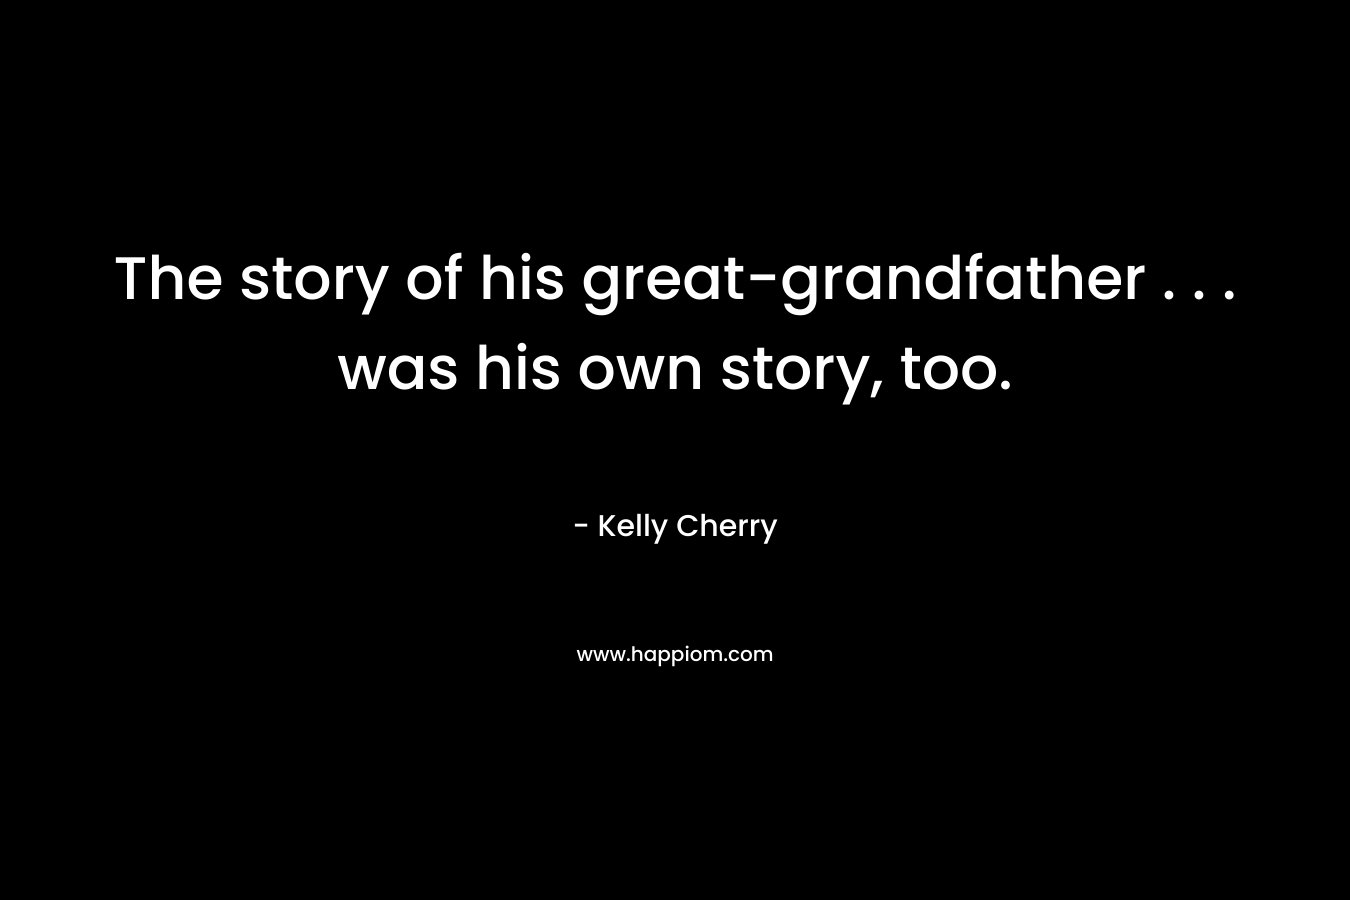 The story of his great-grandfather . . . was his own story, too.